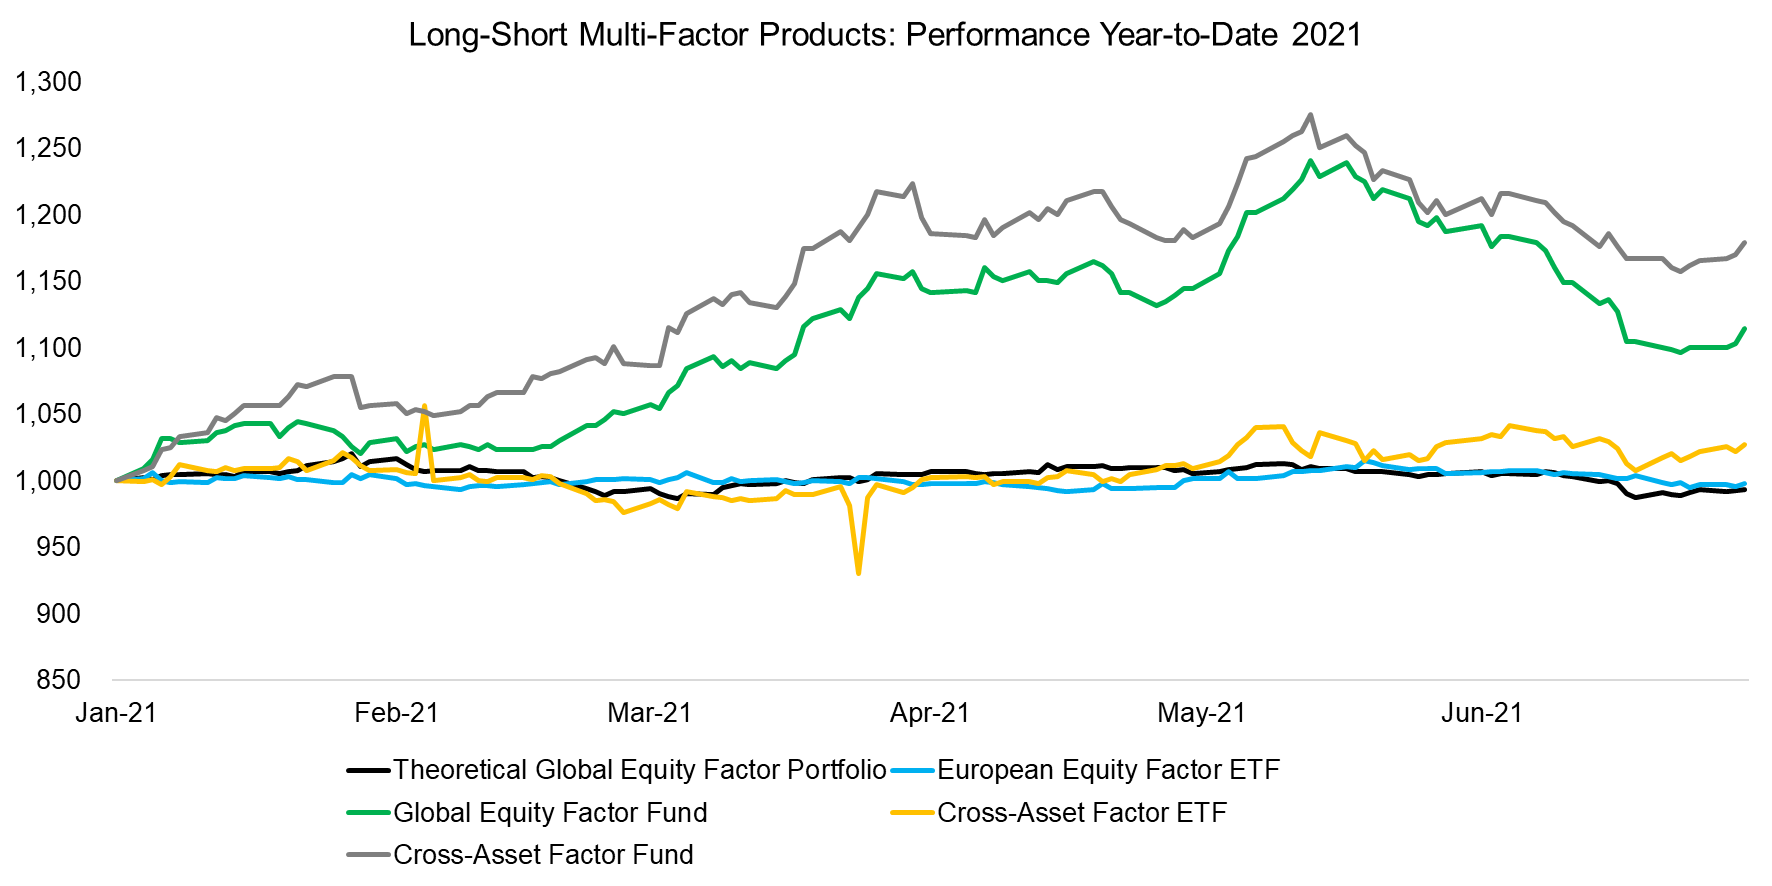 Long-Short Multi-Factor Products Performance Year-to-Date 2021